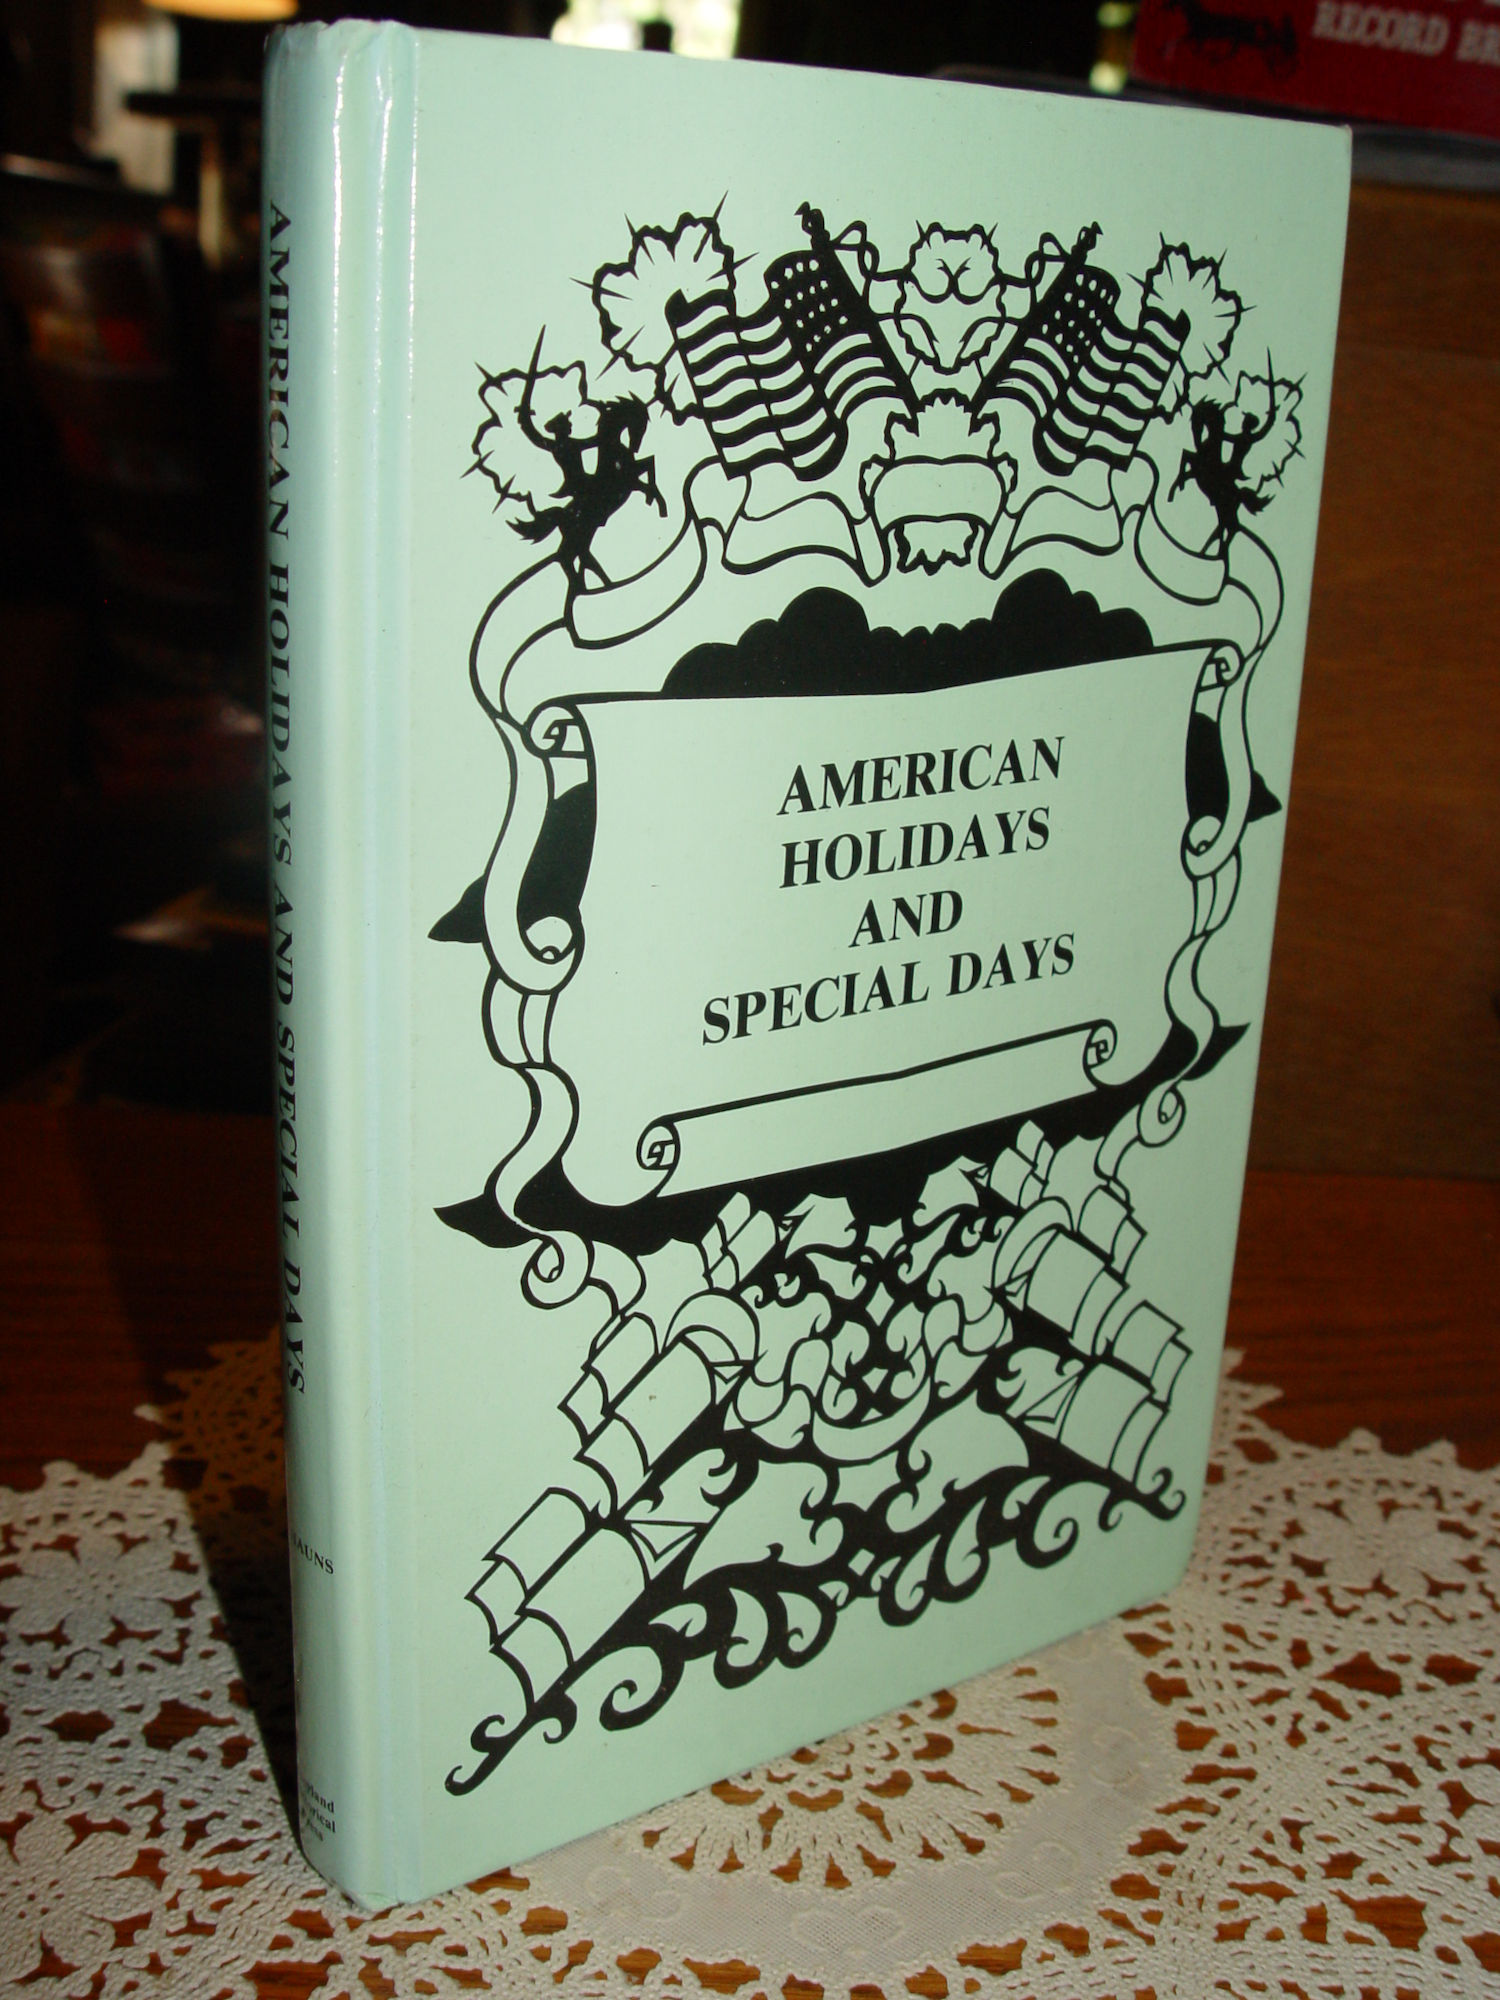 American Holidays and Special Days 1986
                        George and Virginia Schaun